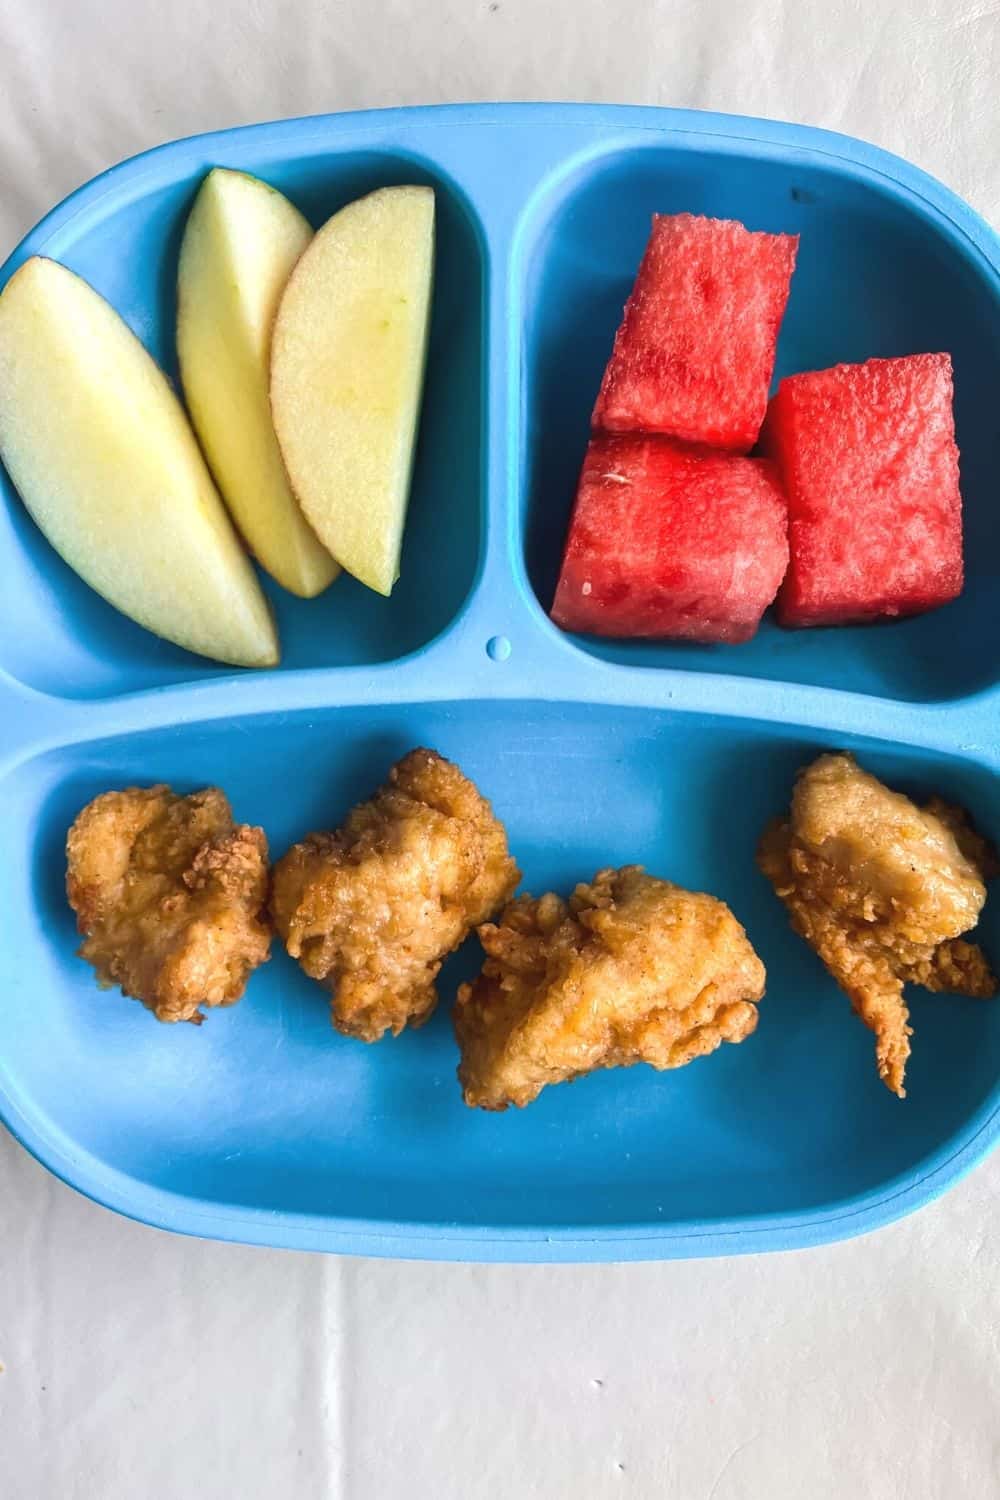 blue divided plastic plate with air fryer chicken nuggets, apple slices, and watermelon cubes on it.